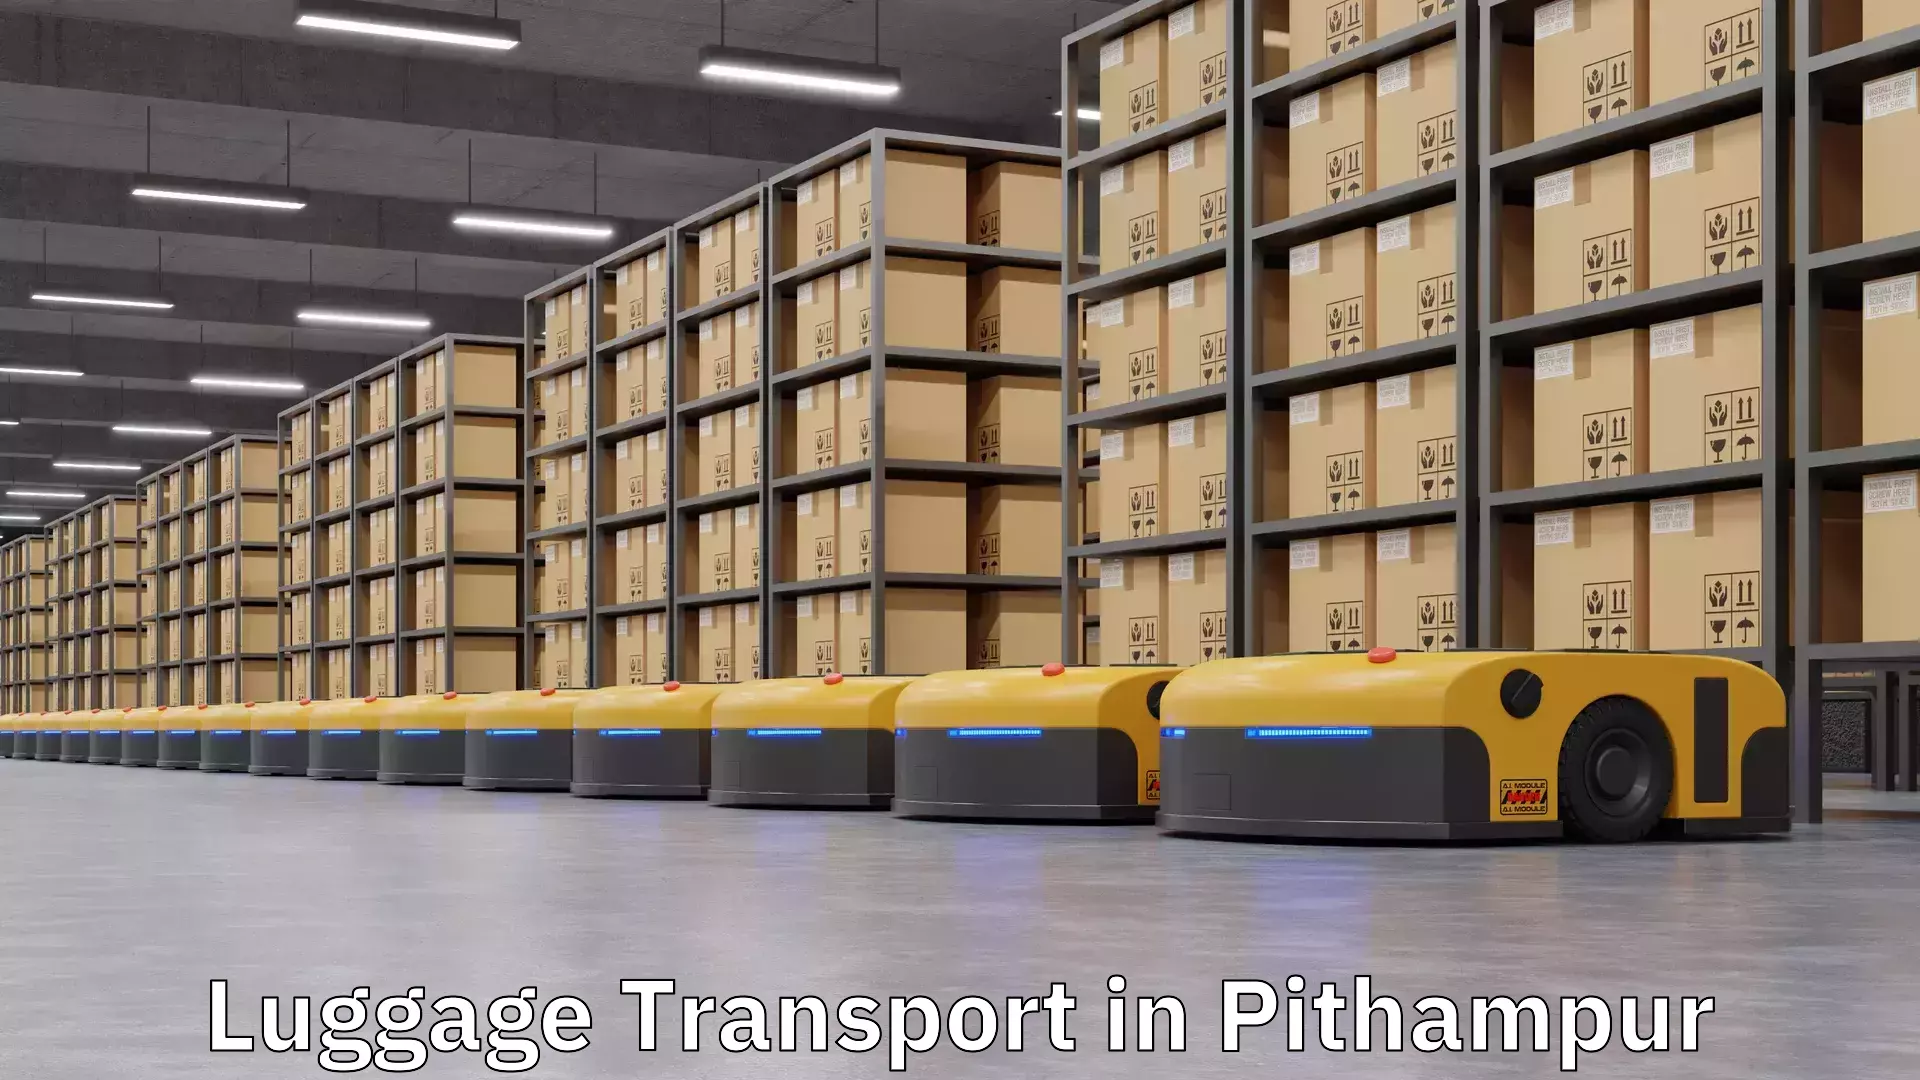 Luggage transfer service in Pithampur